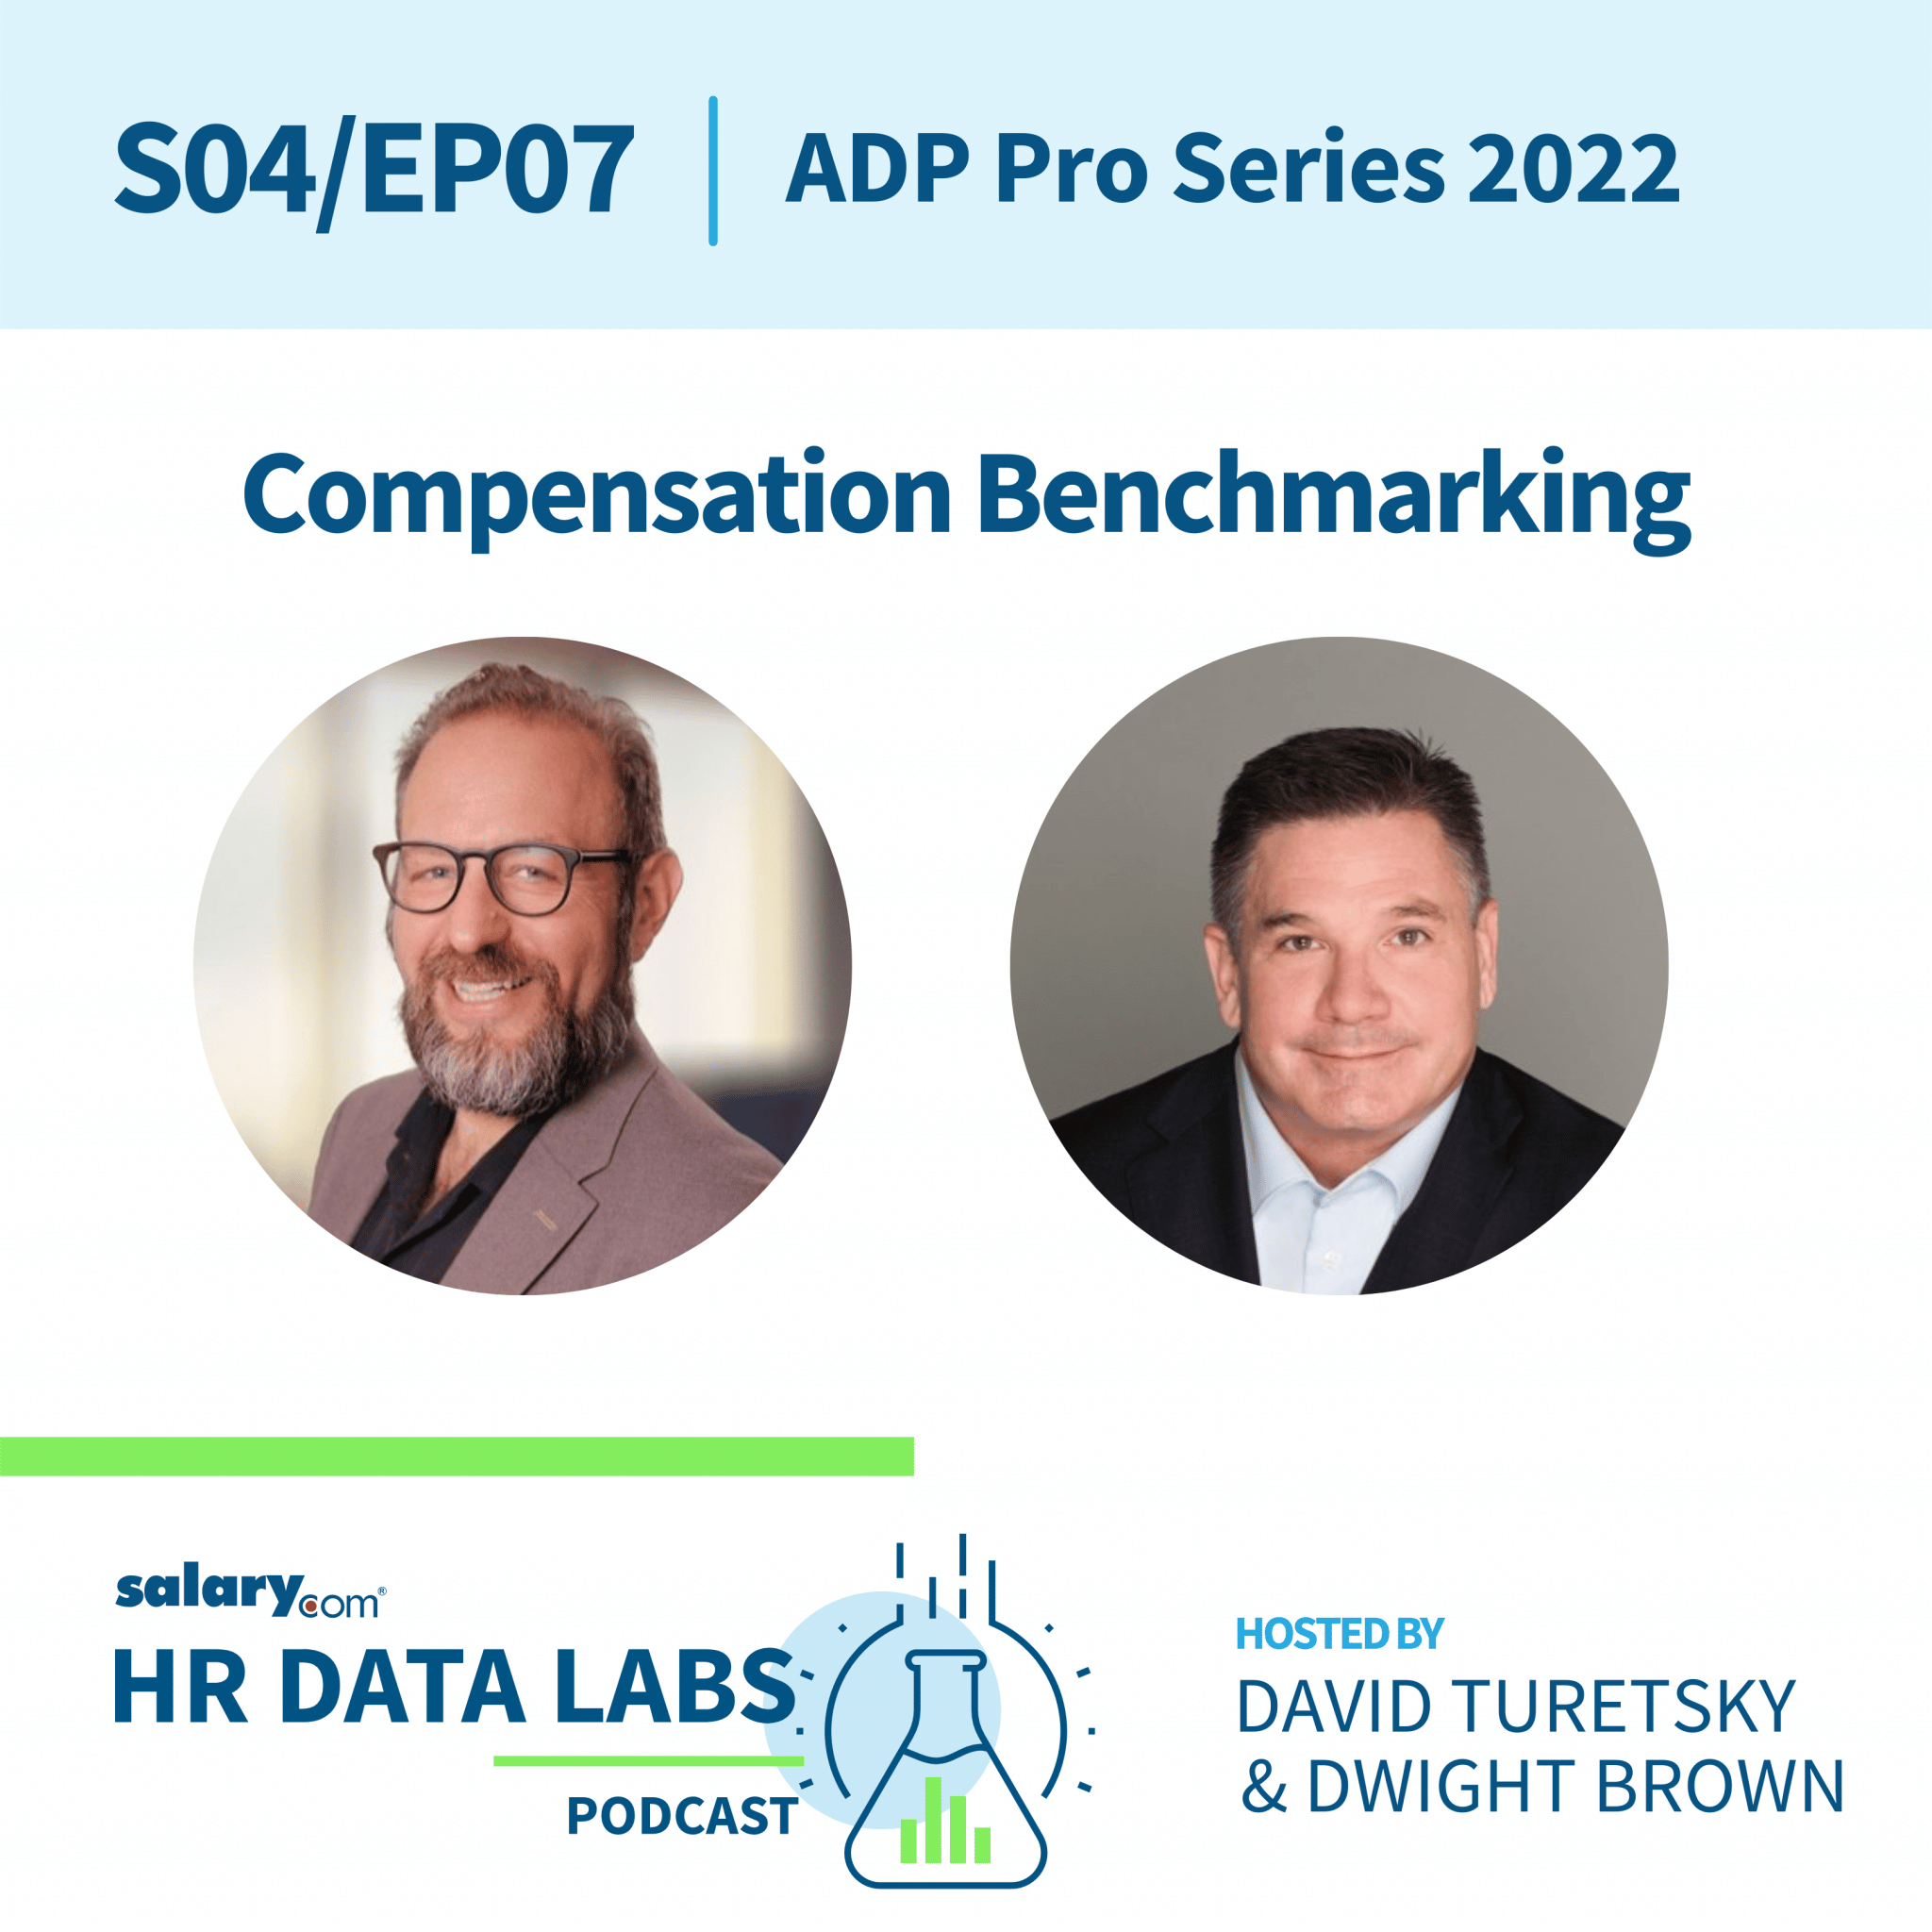 David Turetsky and Dwight Brown – ADP Pro Series 2022: Compensation Benchmarking